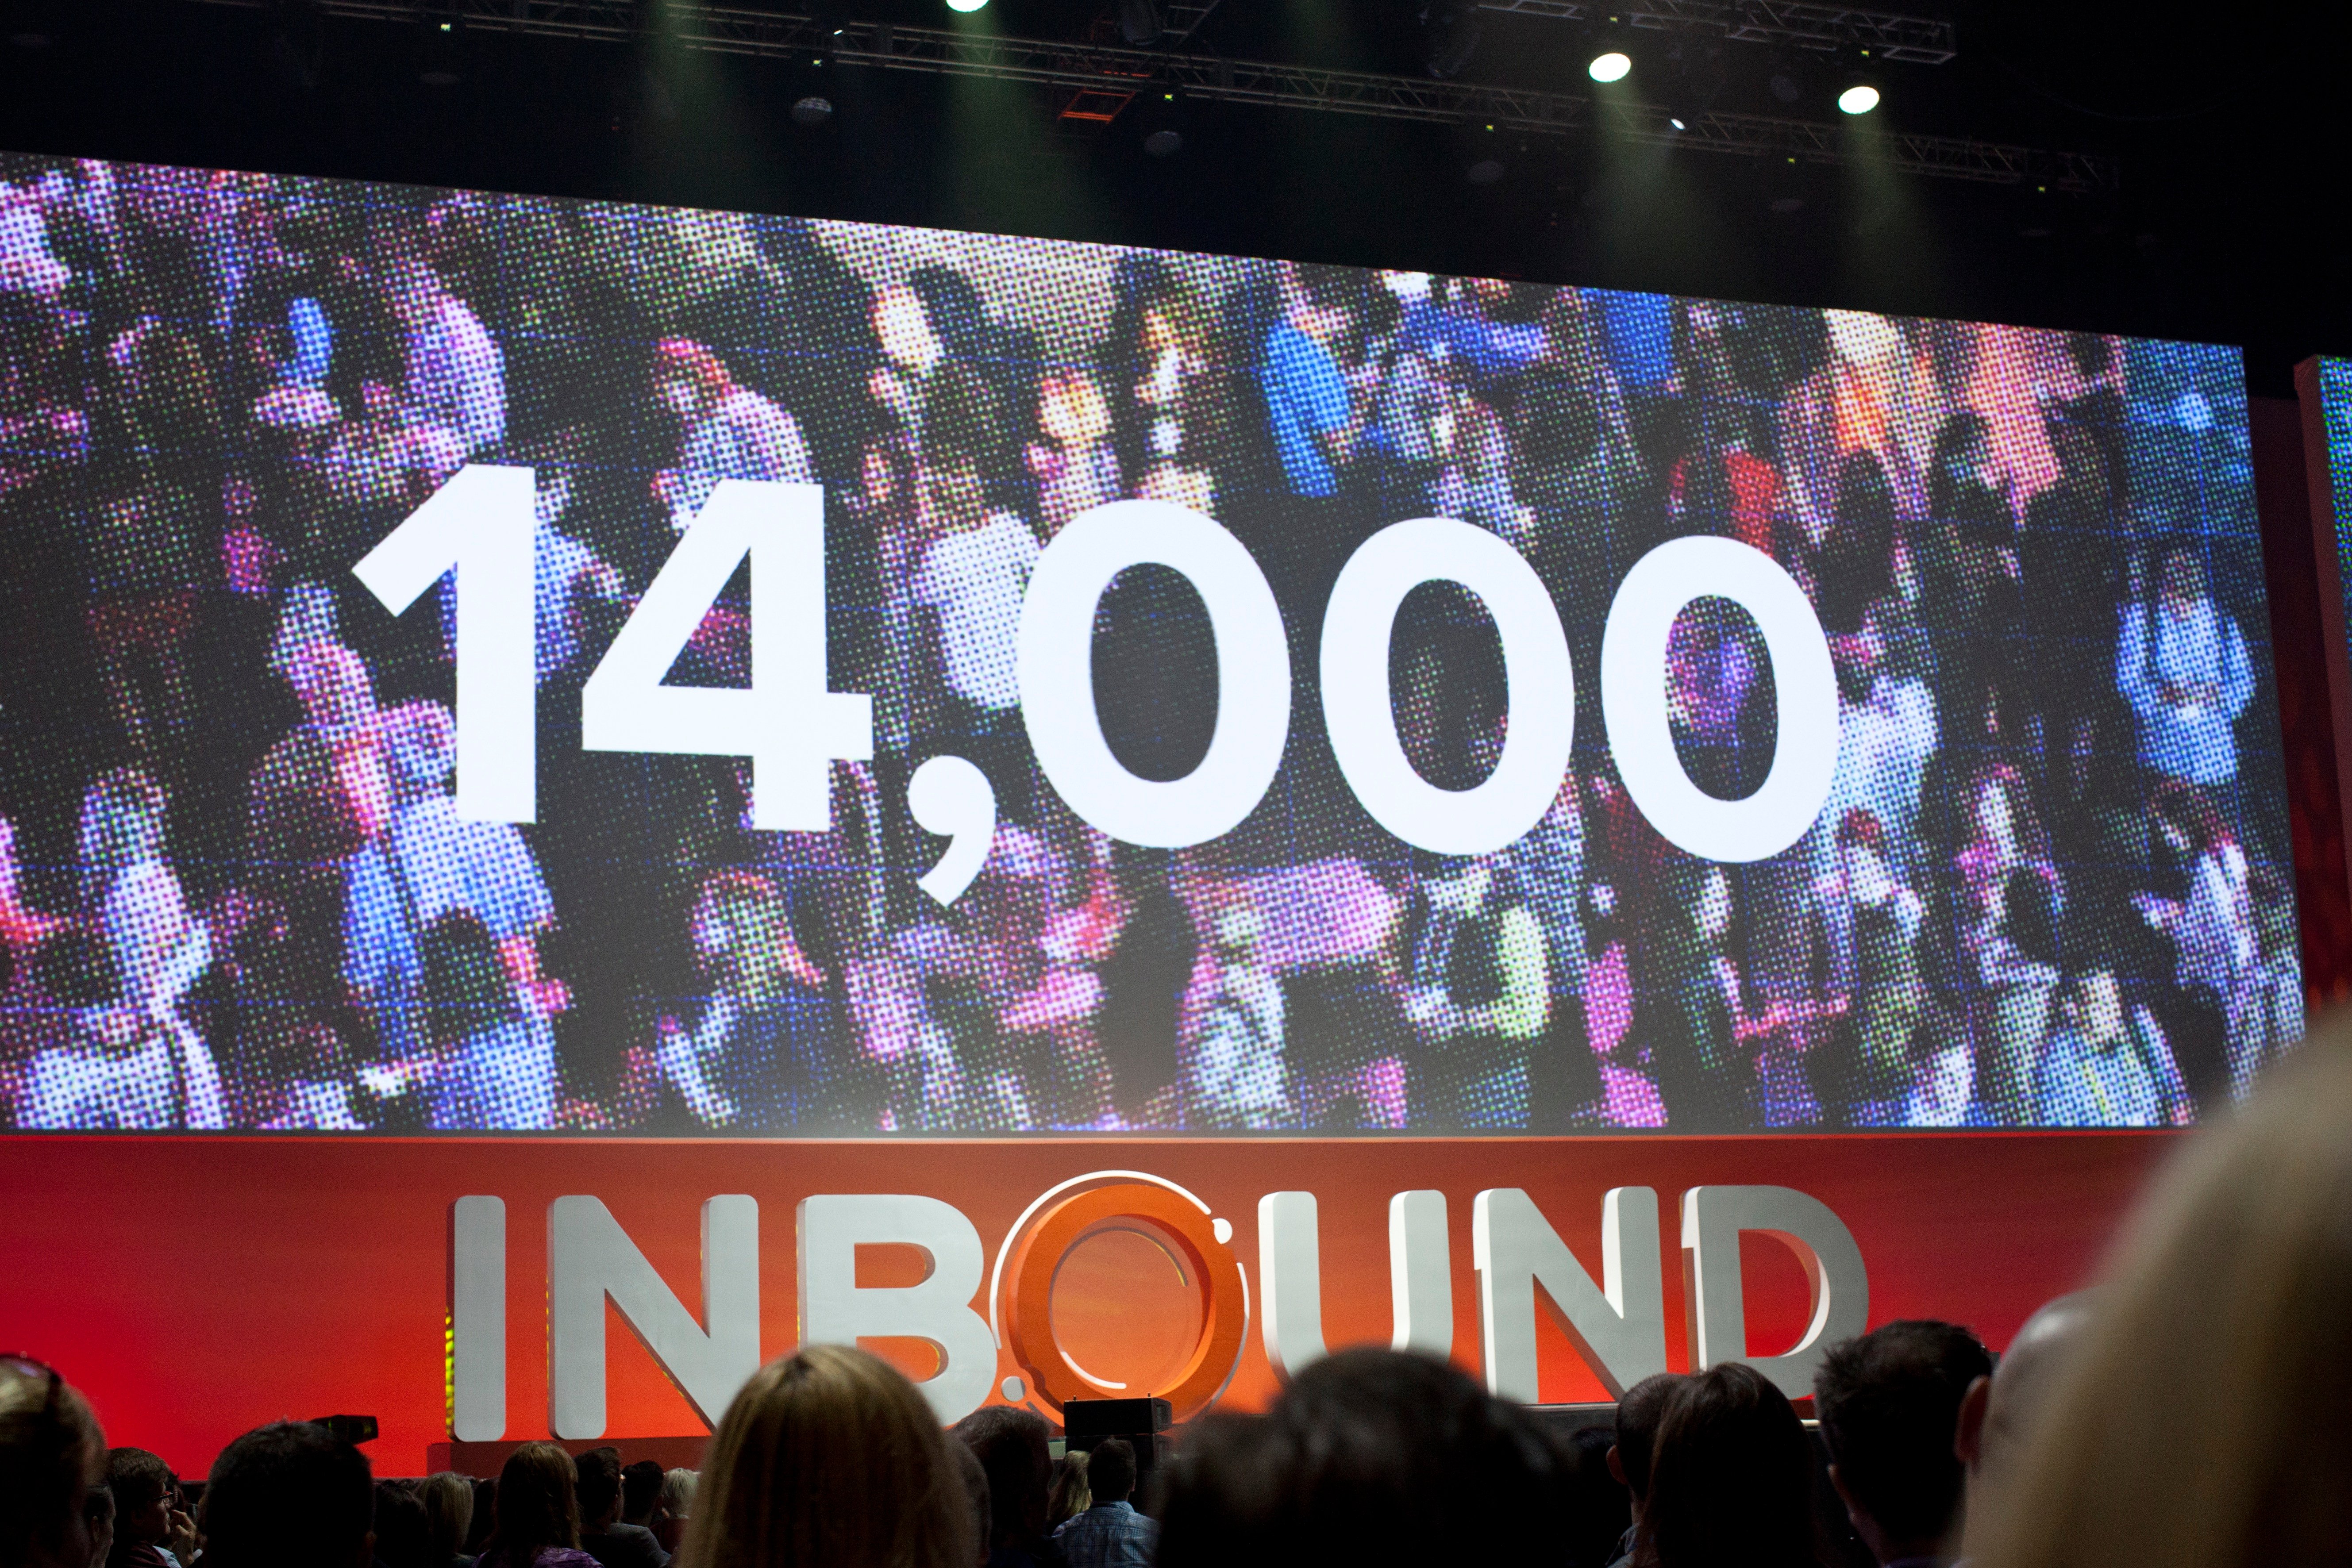 14000 people attended #INBOUND15